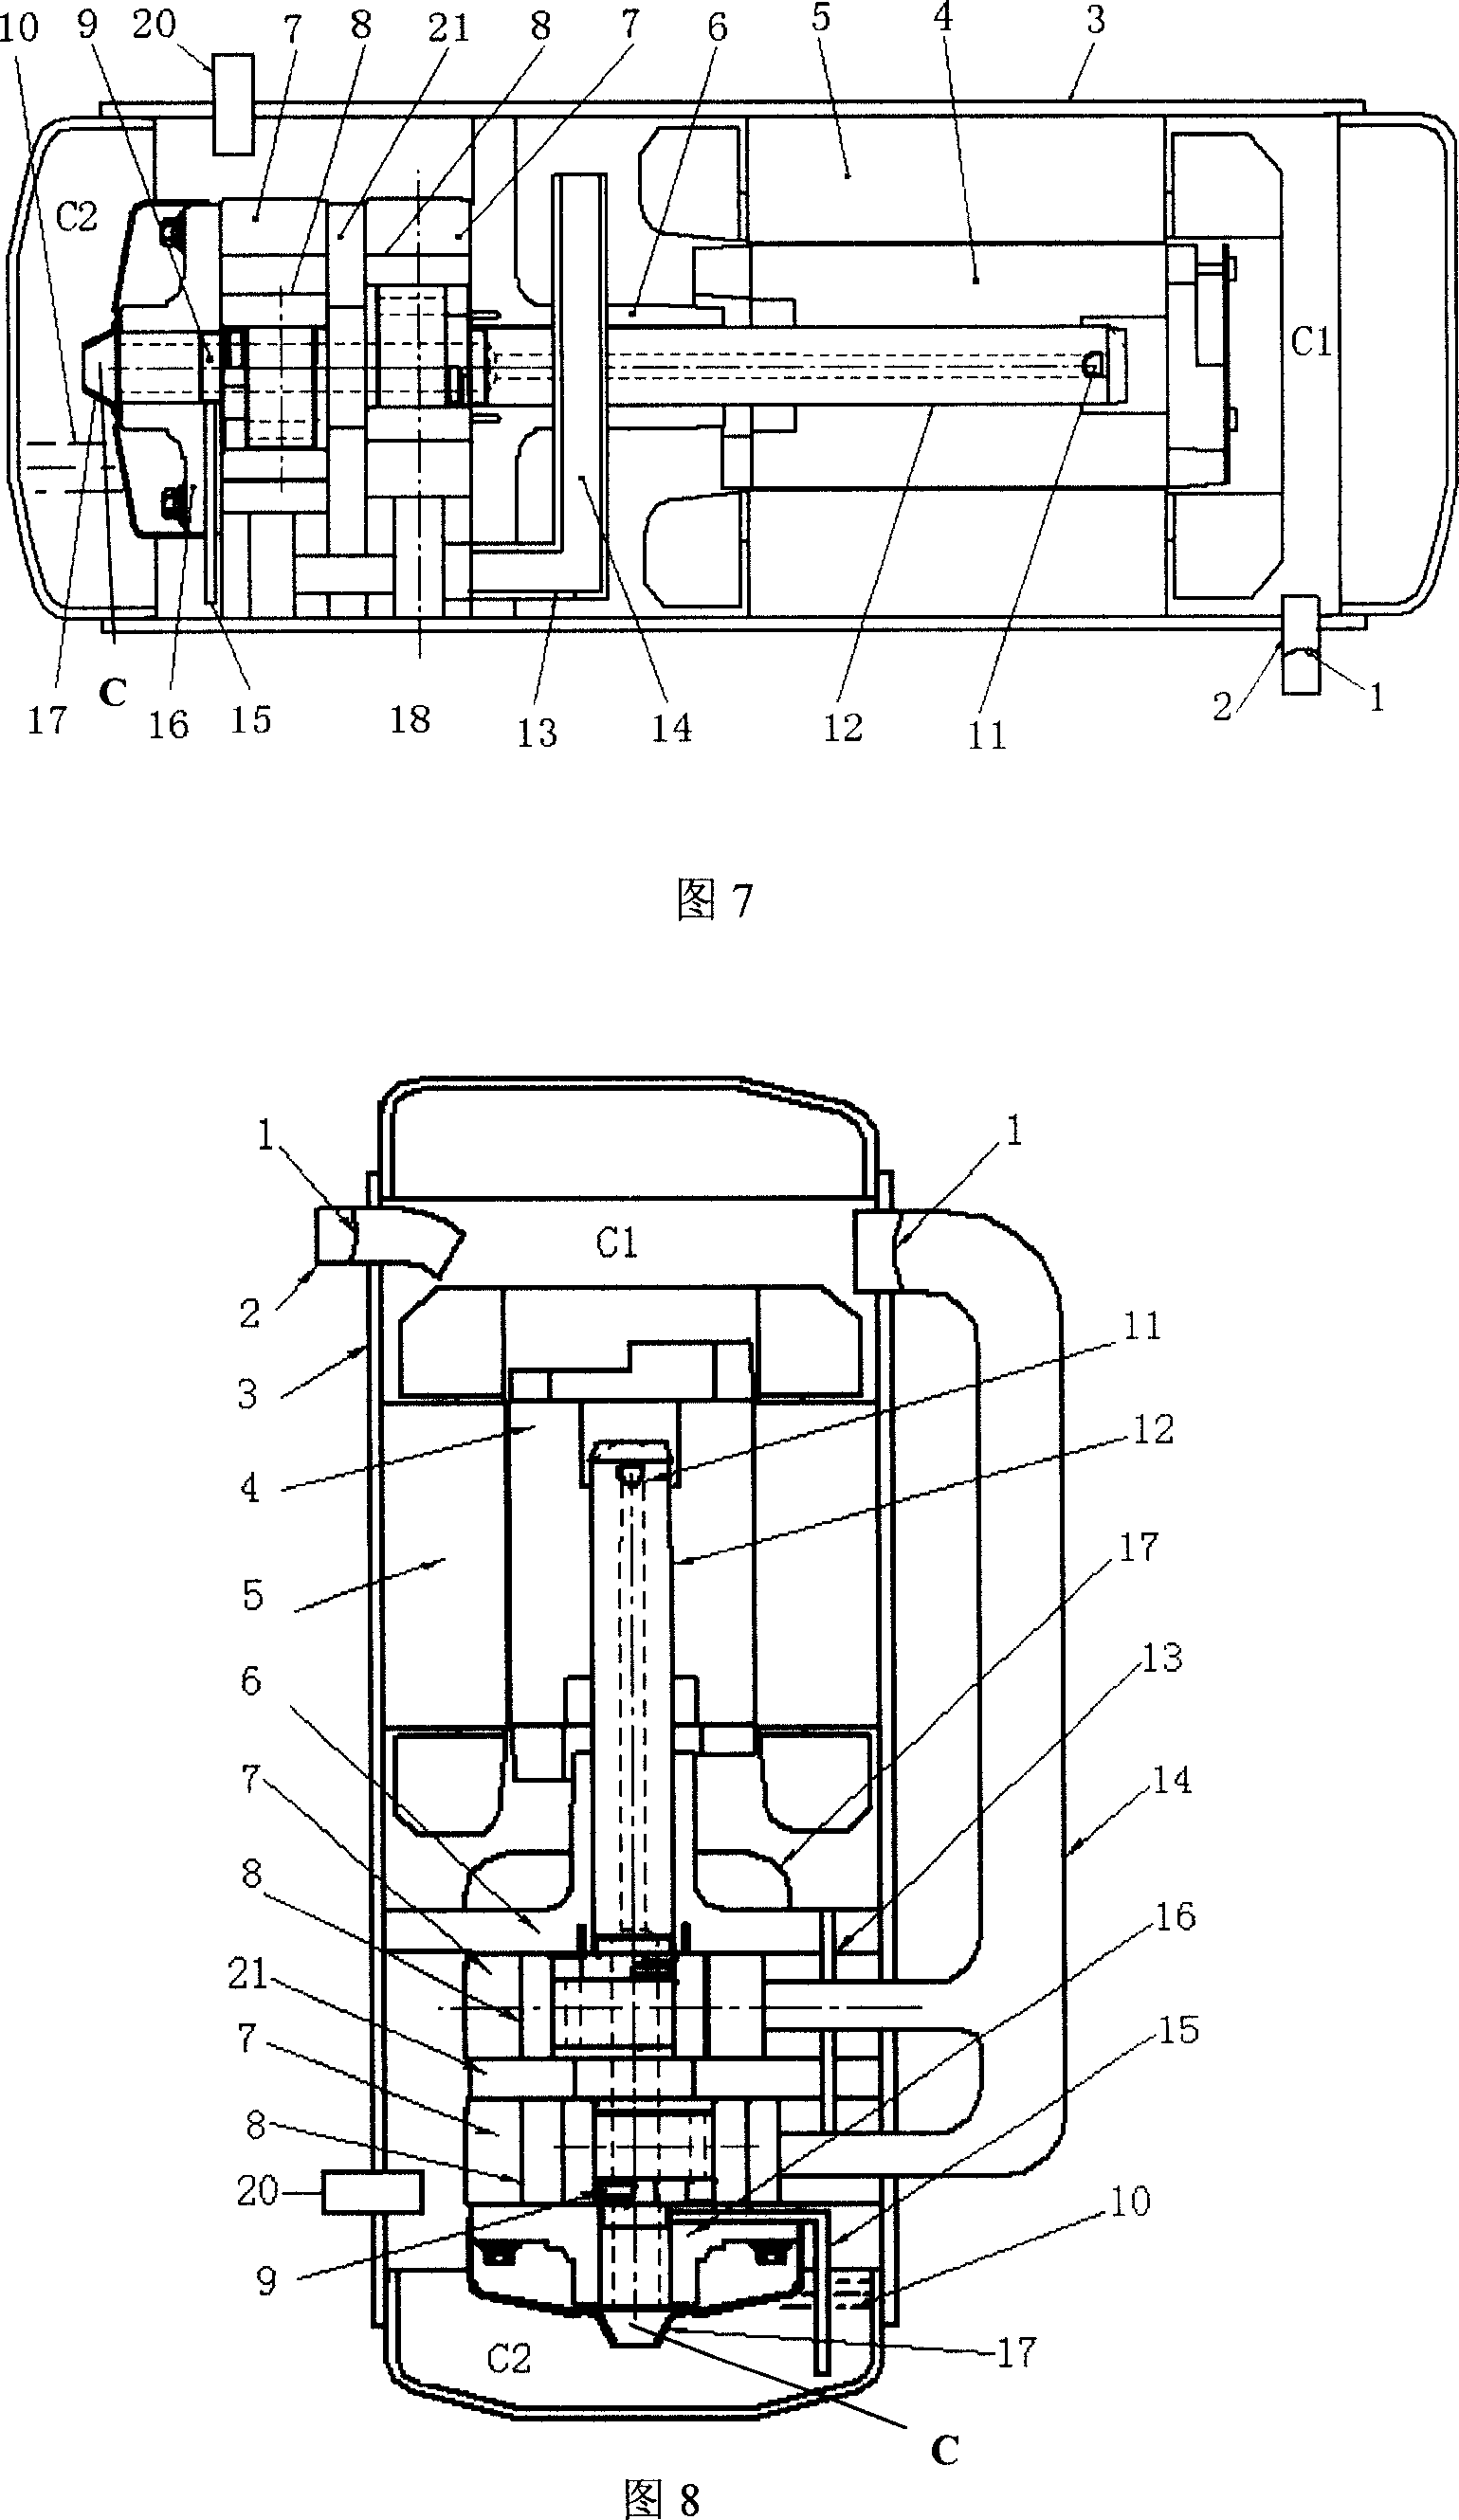 Rolling piston type compressor with no reservoir